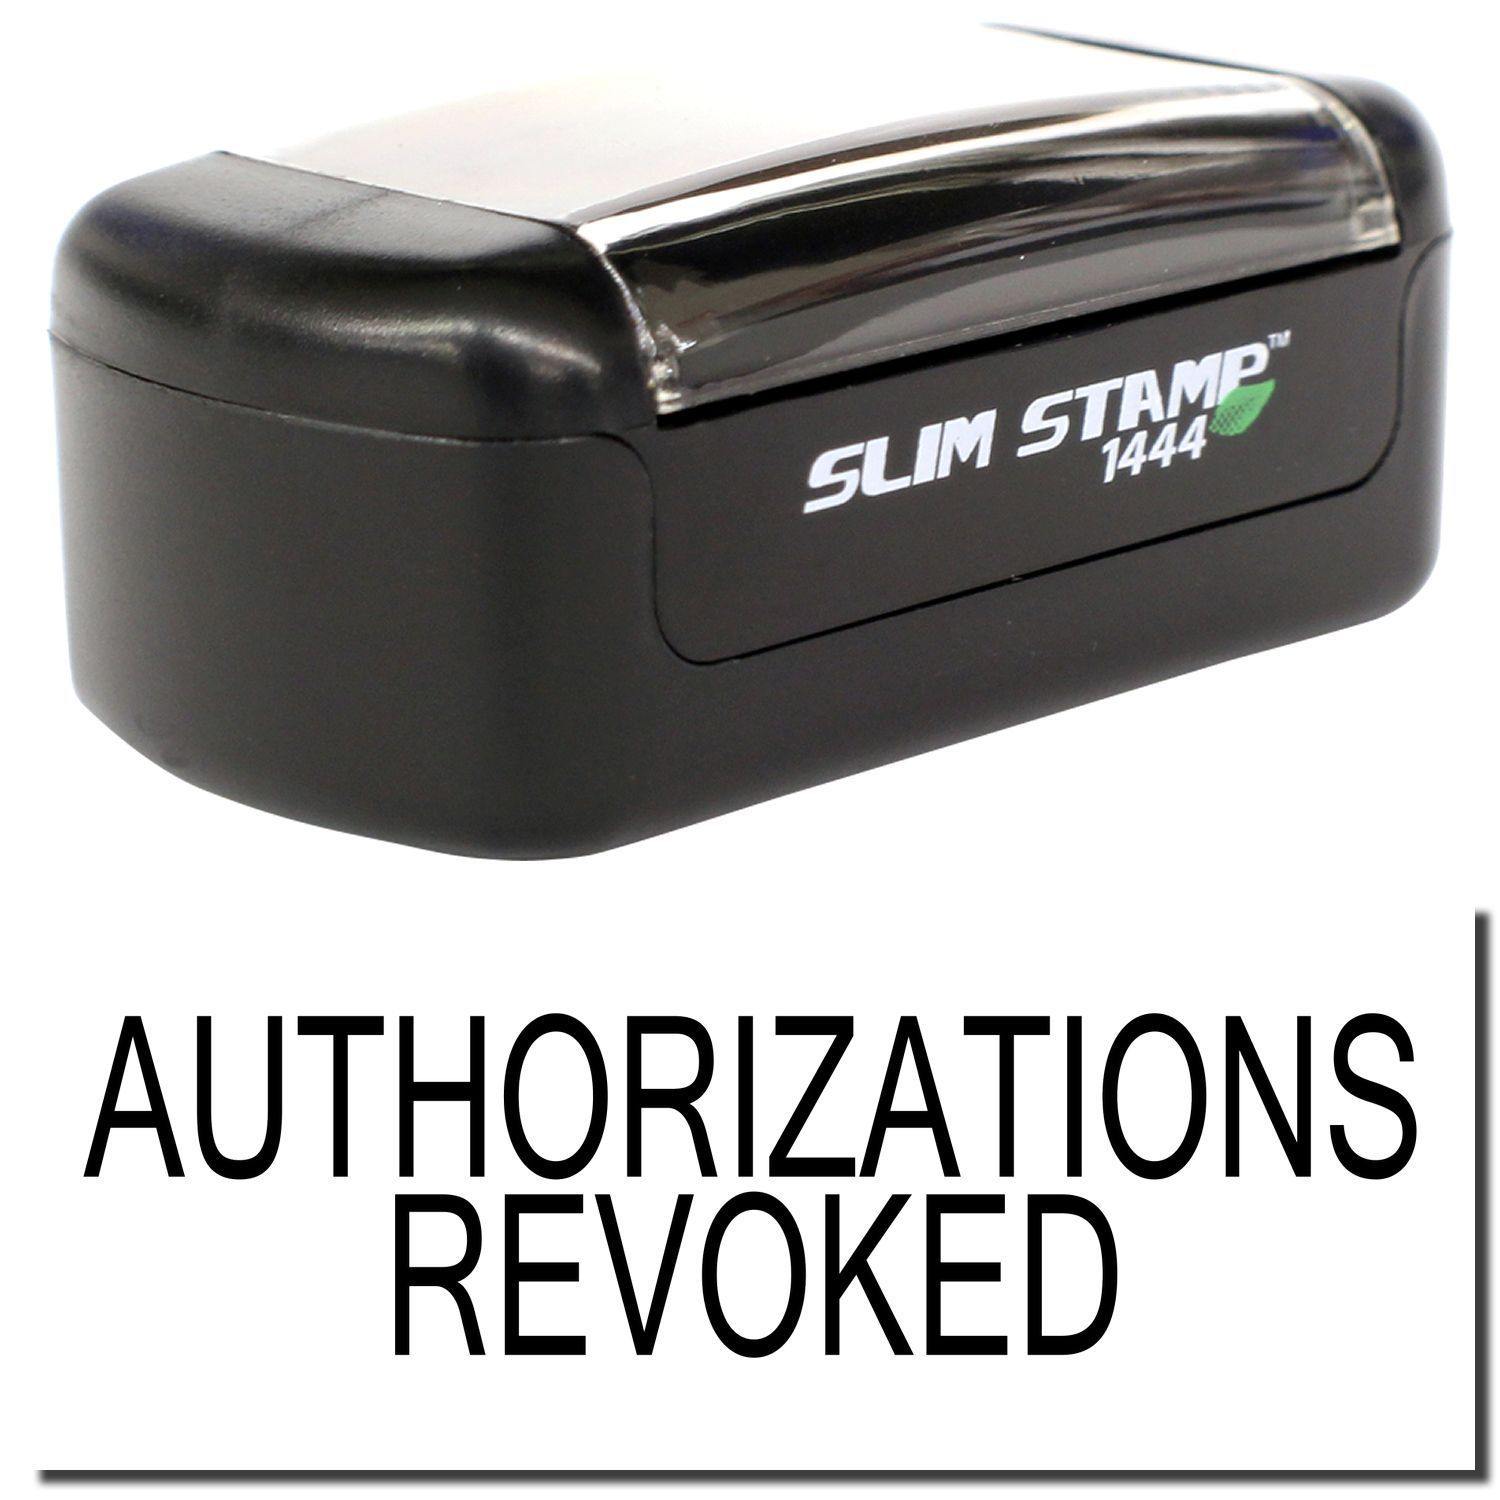 A stock office pre-inked stamp with a stamped image showing how the text "AUTHORIZATIONS REVOKED" is displayed after stamping.